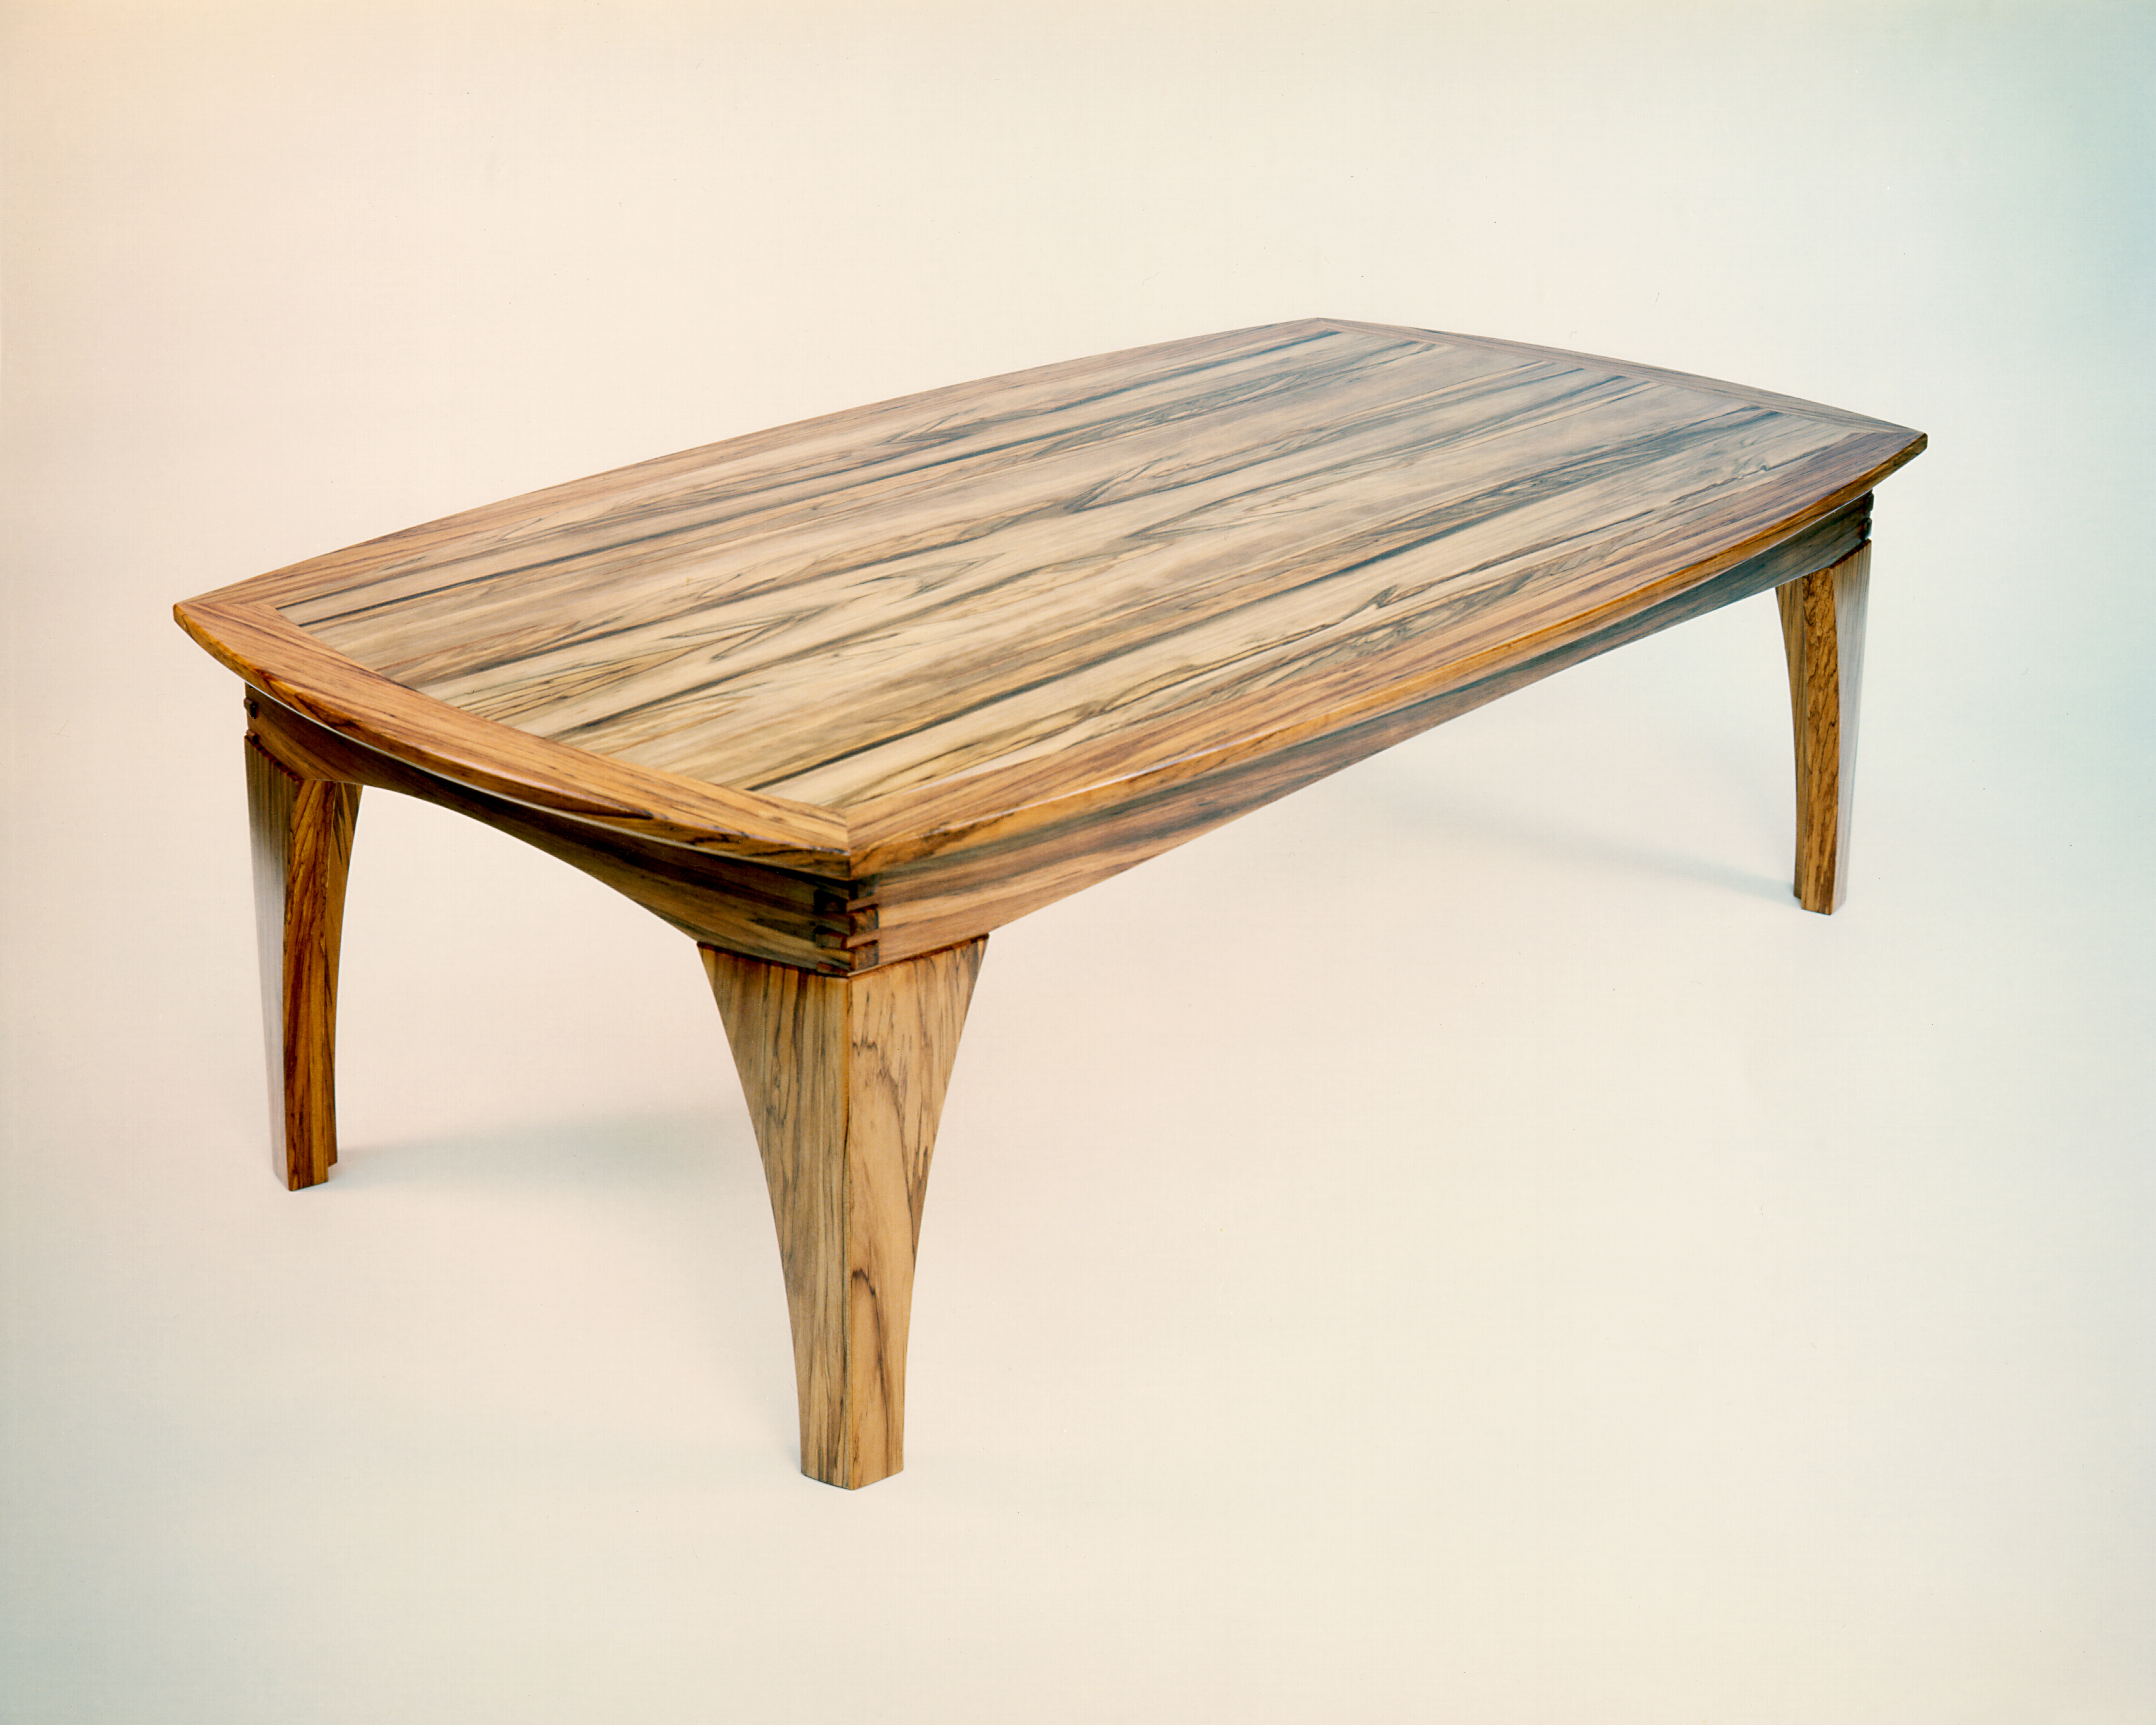 AAsh Coffie Table With 5 Sided Legs by Don DeDobbeleer, Fine Custom Wood Furniture